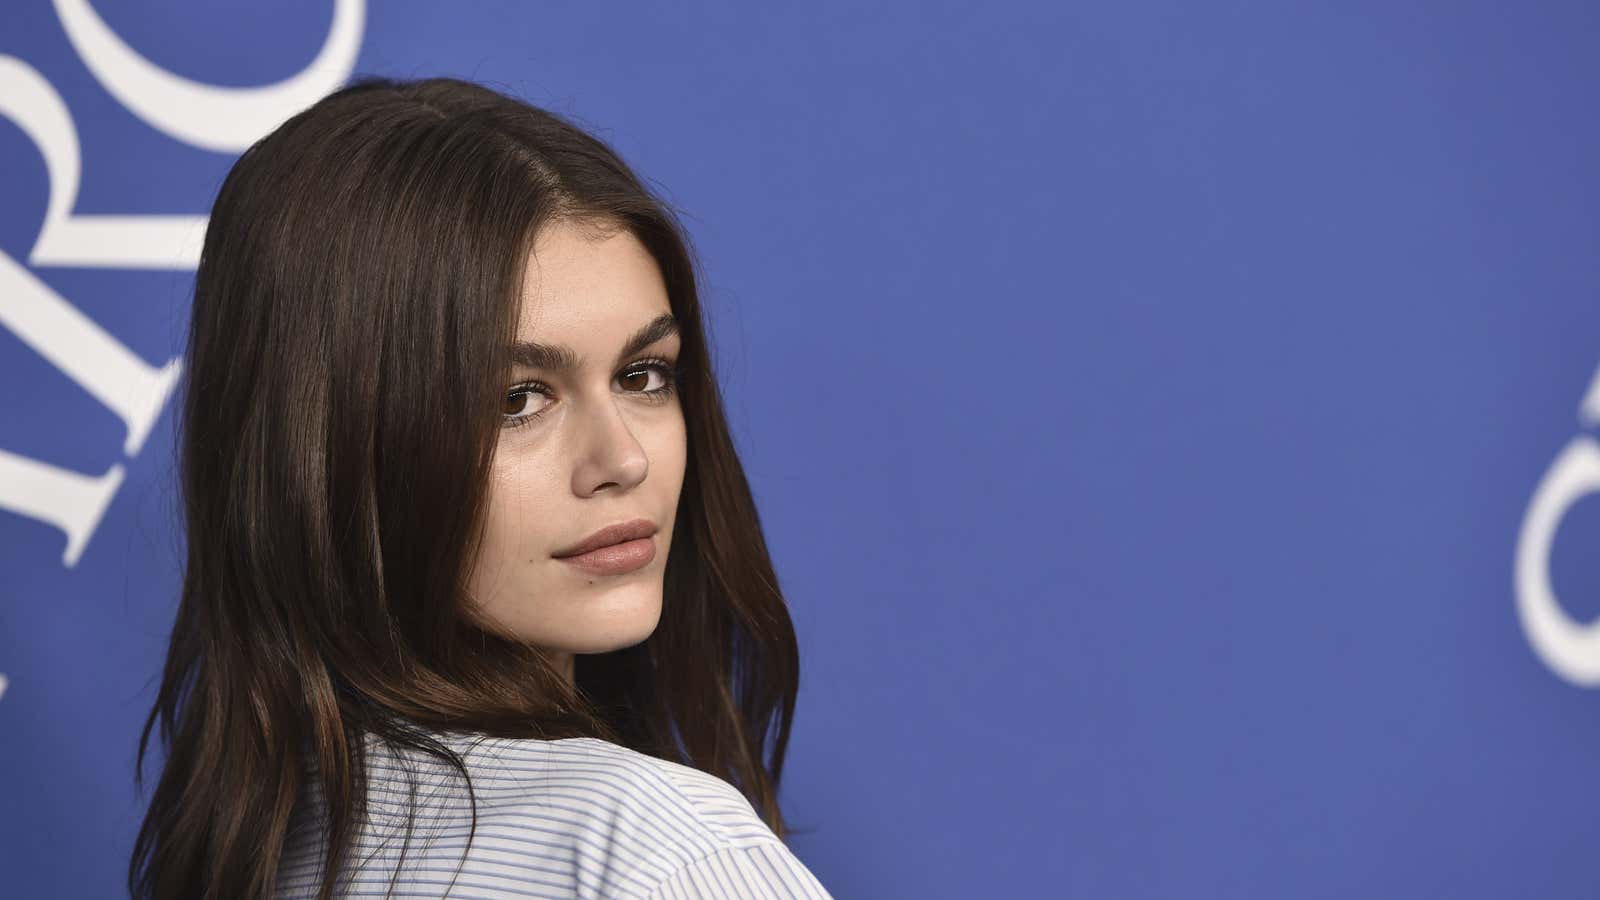 Kaia Gerber, who has walked for Saint Laurent, is one of fashion’s top models, and not yet 18.